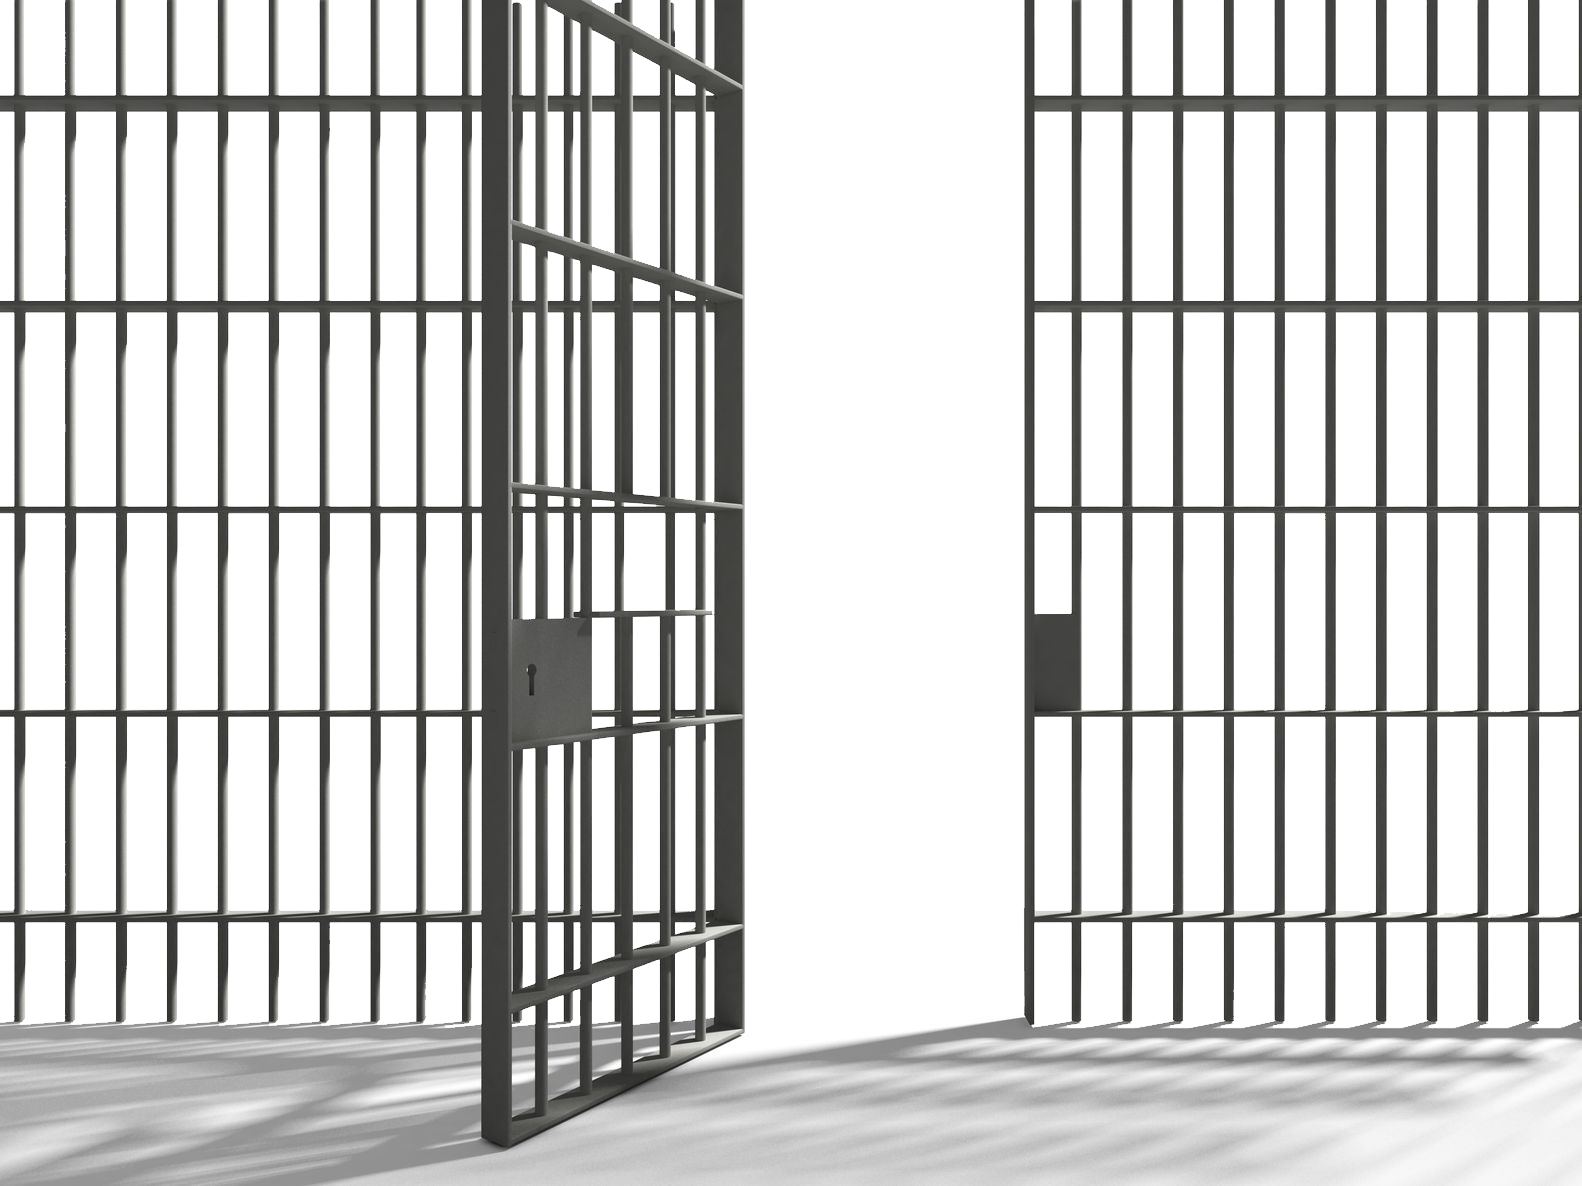 jail clipart background